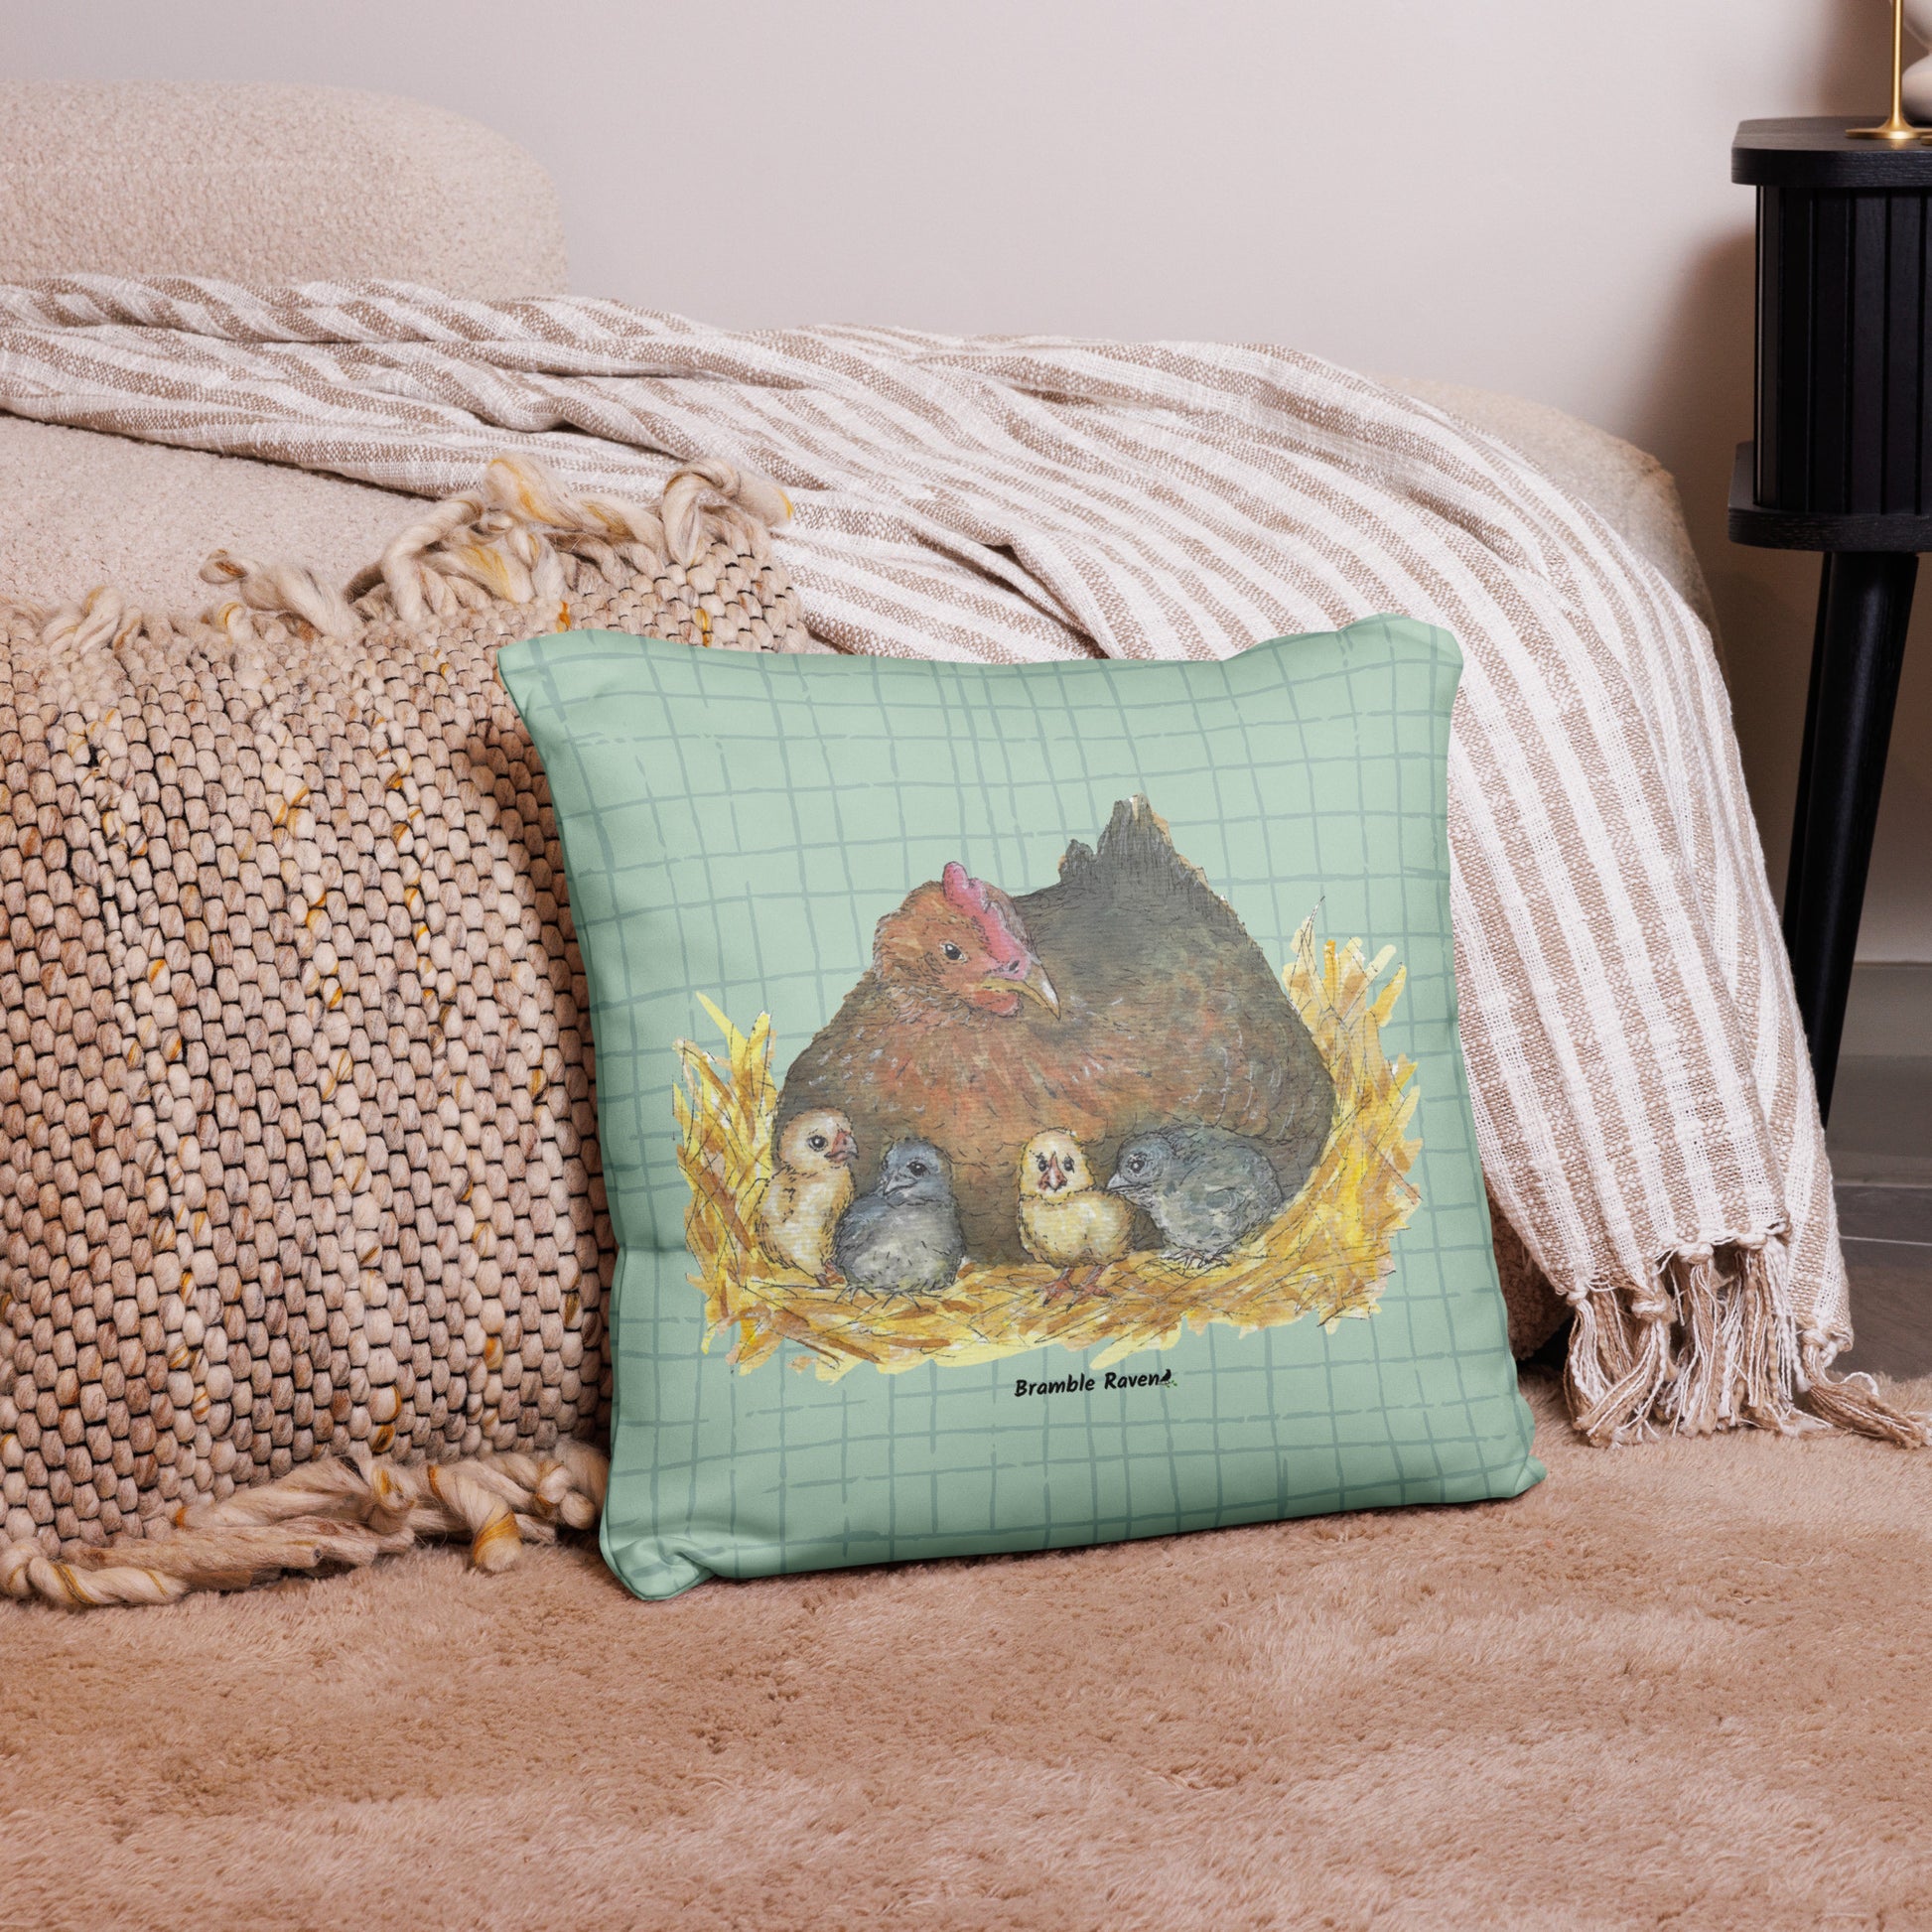 18 by 18 inch mother hen decorative throw pillow. Features Heather Silver's watercolor print of a mother hen and chicks on a green cross-hatched background. Image printed on both sides. Has a hidden zipper and washable cover. Comes with shape-retaining insert. Shown on tan carpet by beige bed.